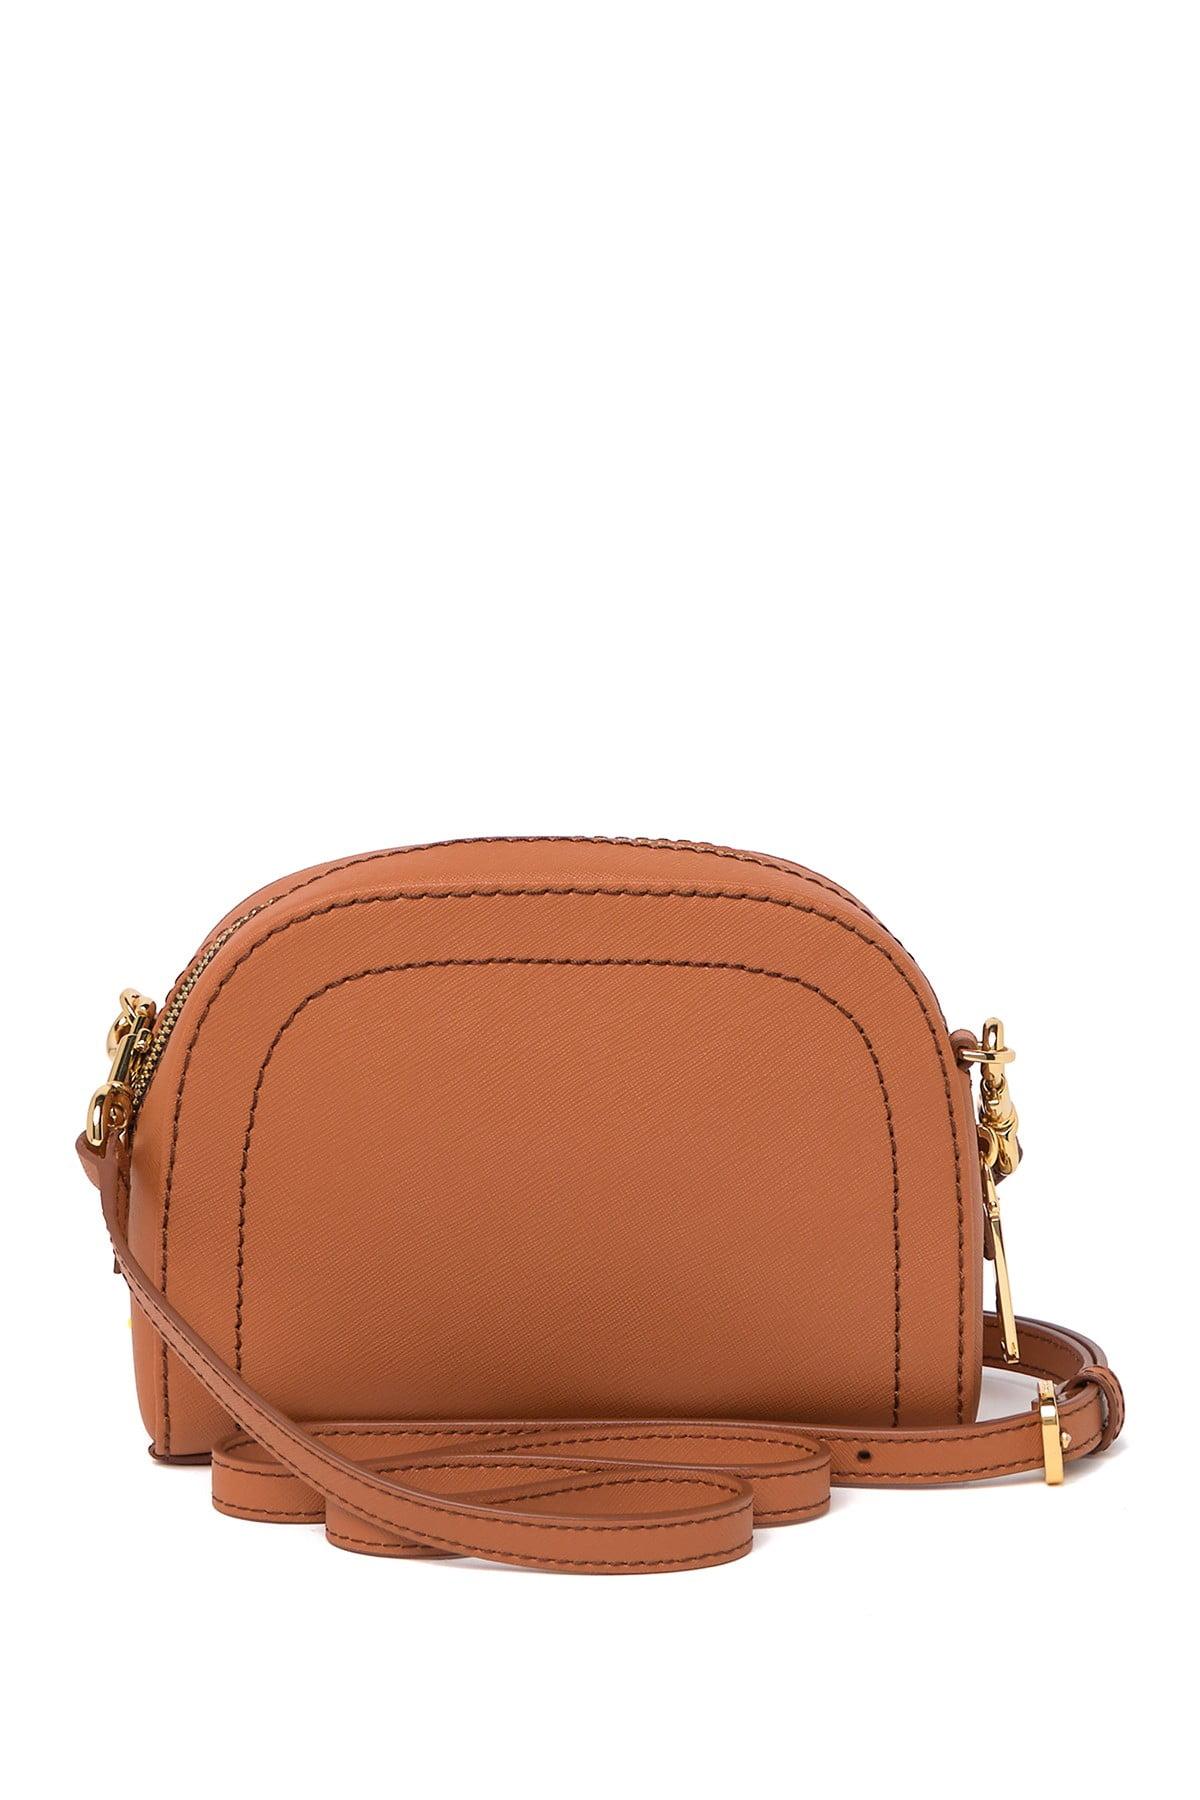 Marc Jacobs Playback Leather Crossbody Bag in Smoked Almond (Black) - Lyst